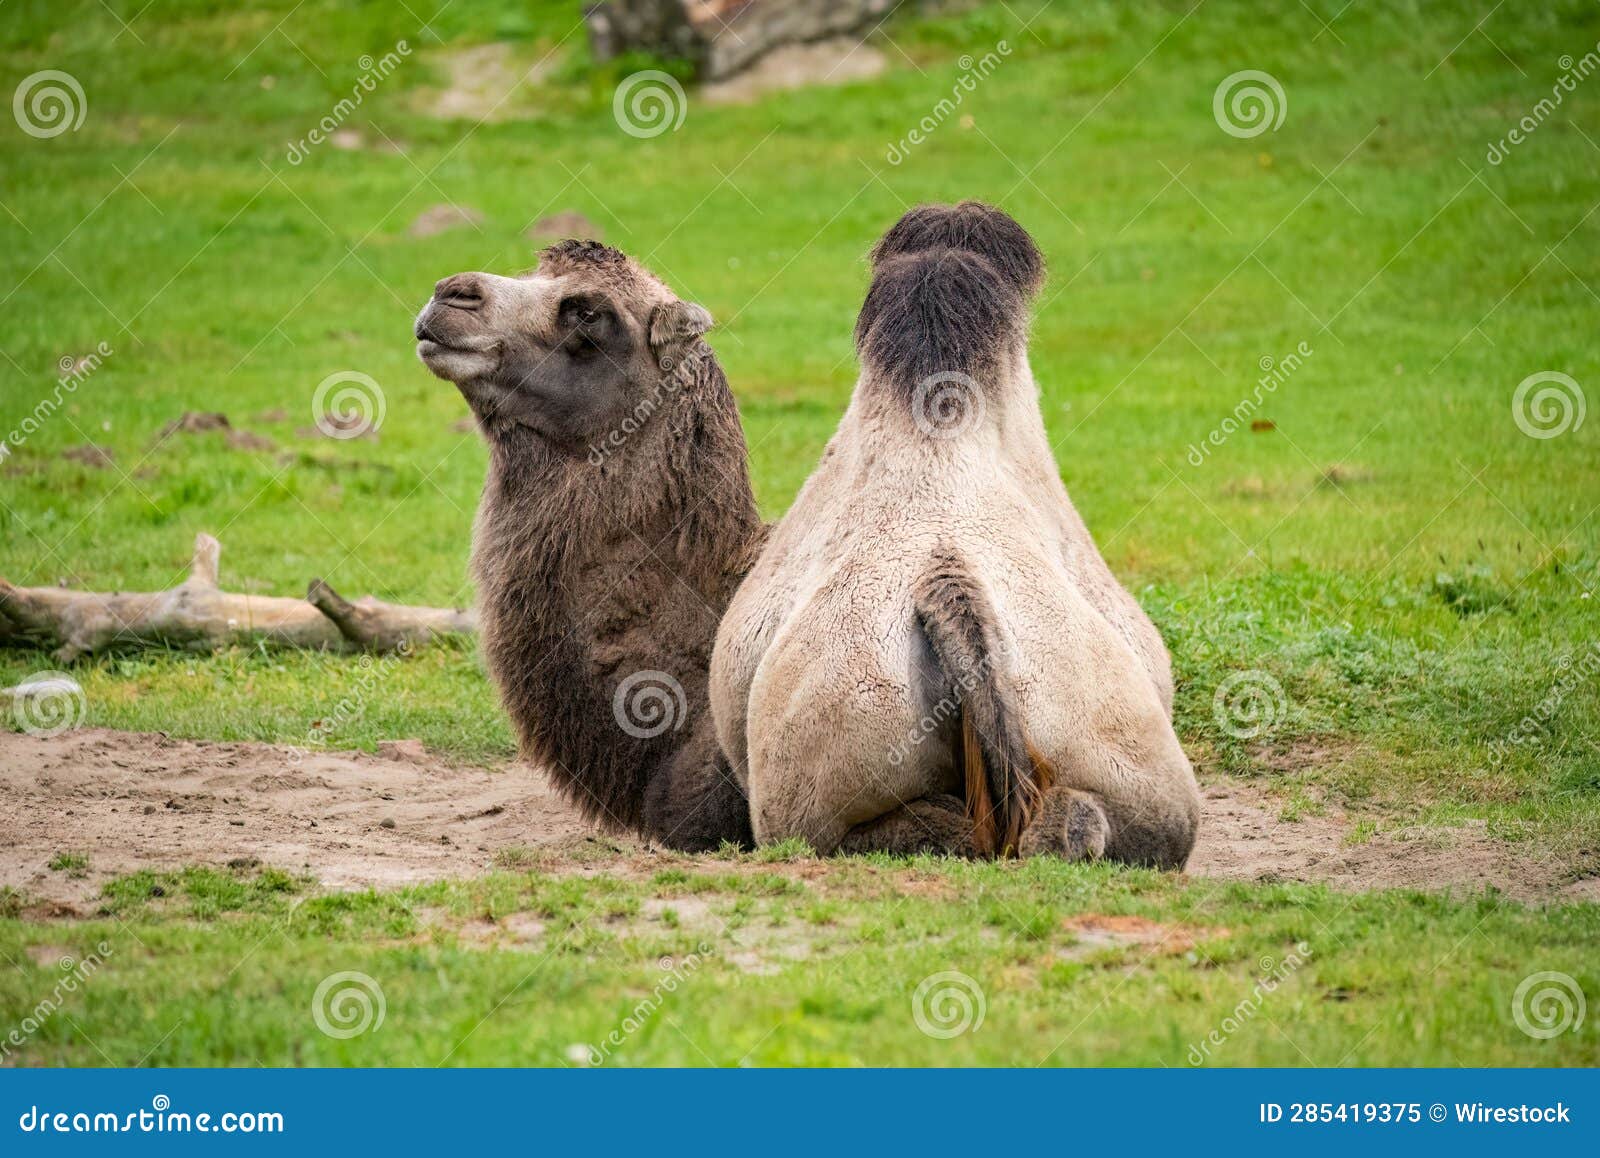 Camel Lounging in a Lush, Green Field. Stock Image - Image of mammal ...